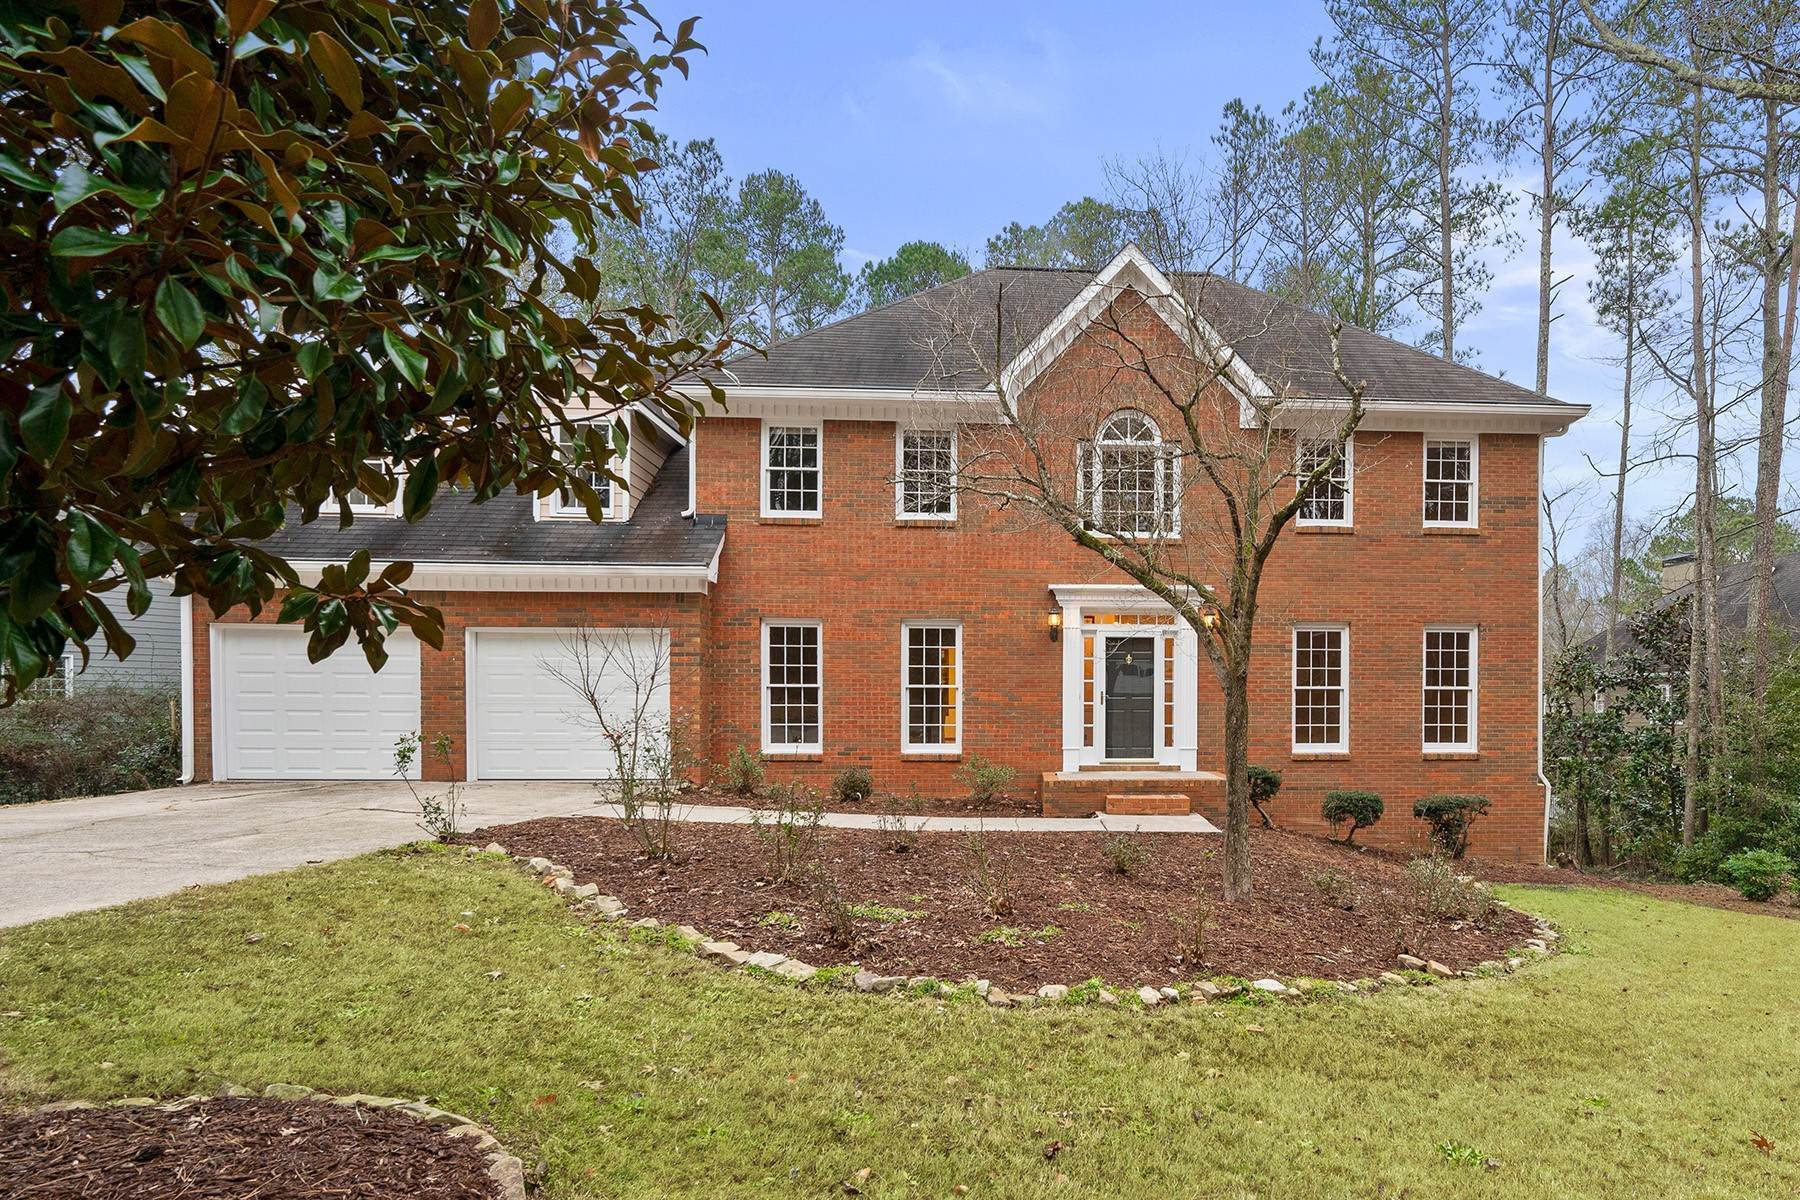 Single Family Homes for Sale at Wonderful Home in Sought-After Swim and Tennis Community of Saddlebrook 1092 Polo Club Drive Marietta, Georgia 30064 United States